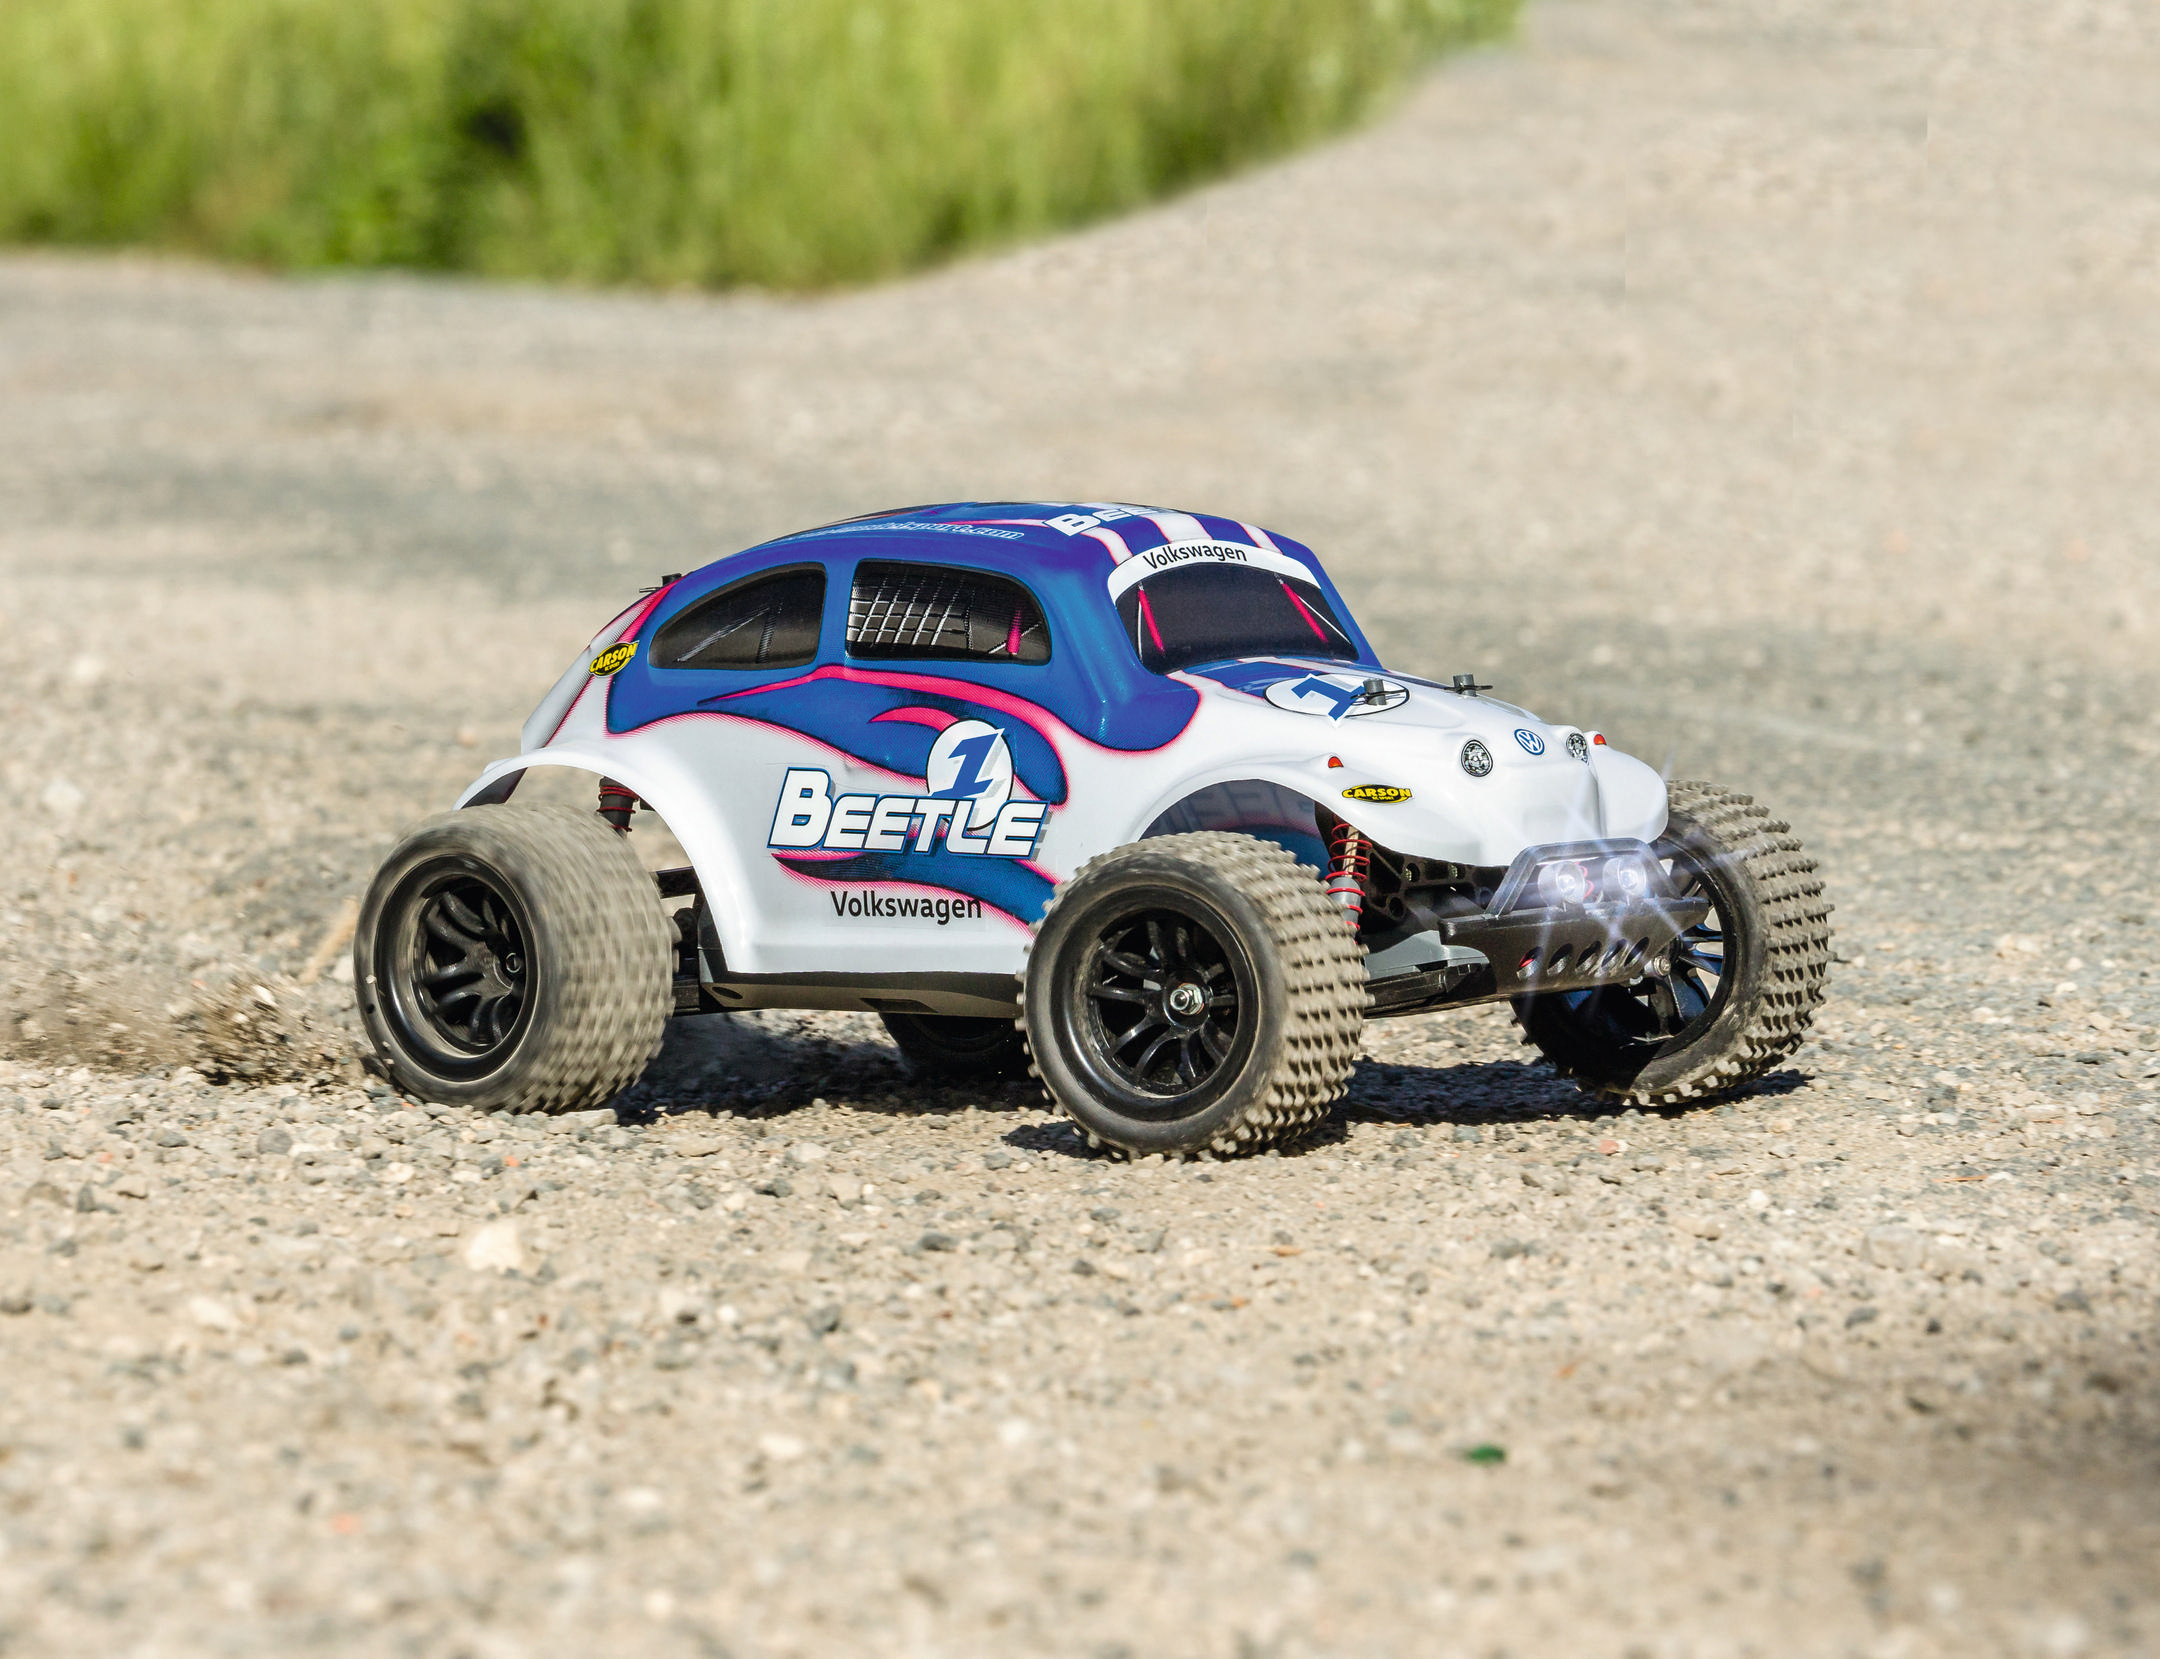 CARSON 1:10 VW Beetle 2.4G 100% RTR FE Mehrfarbig Spielzeugmodell